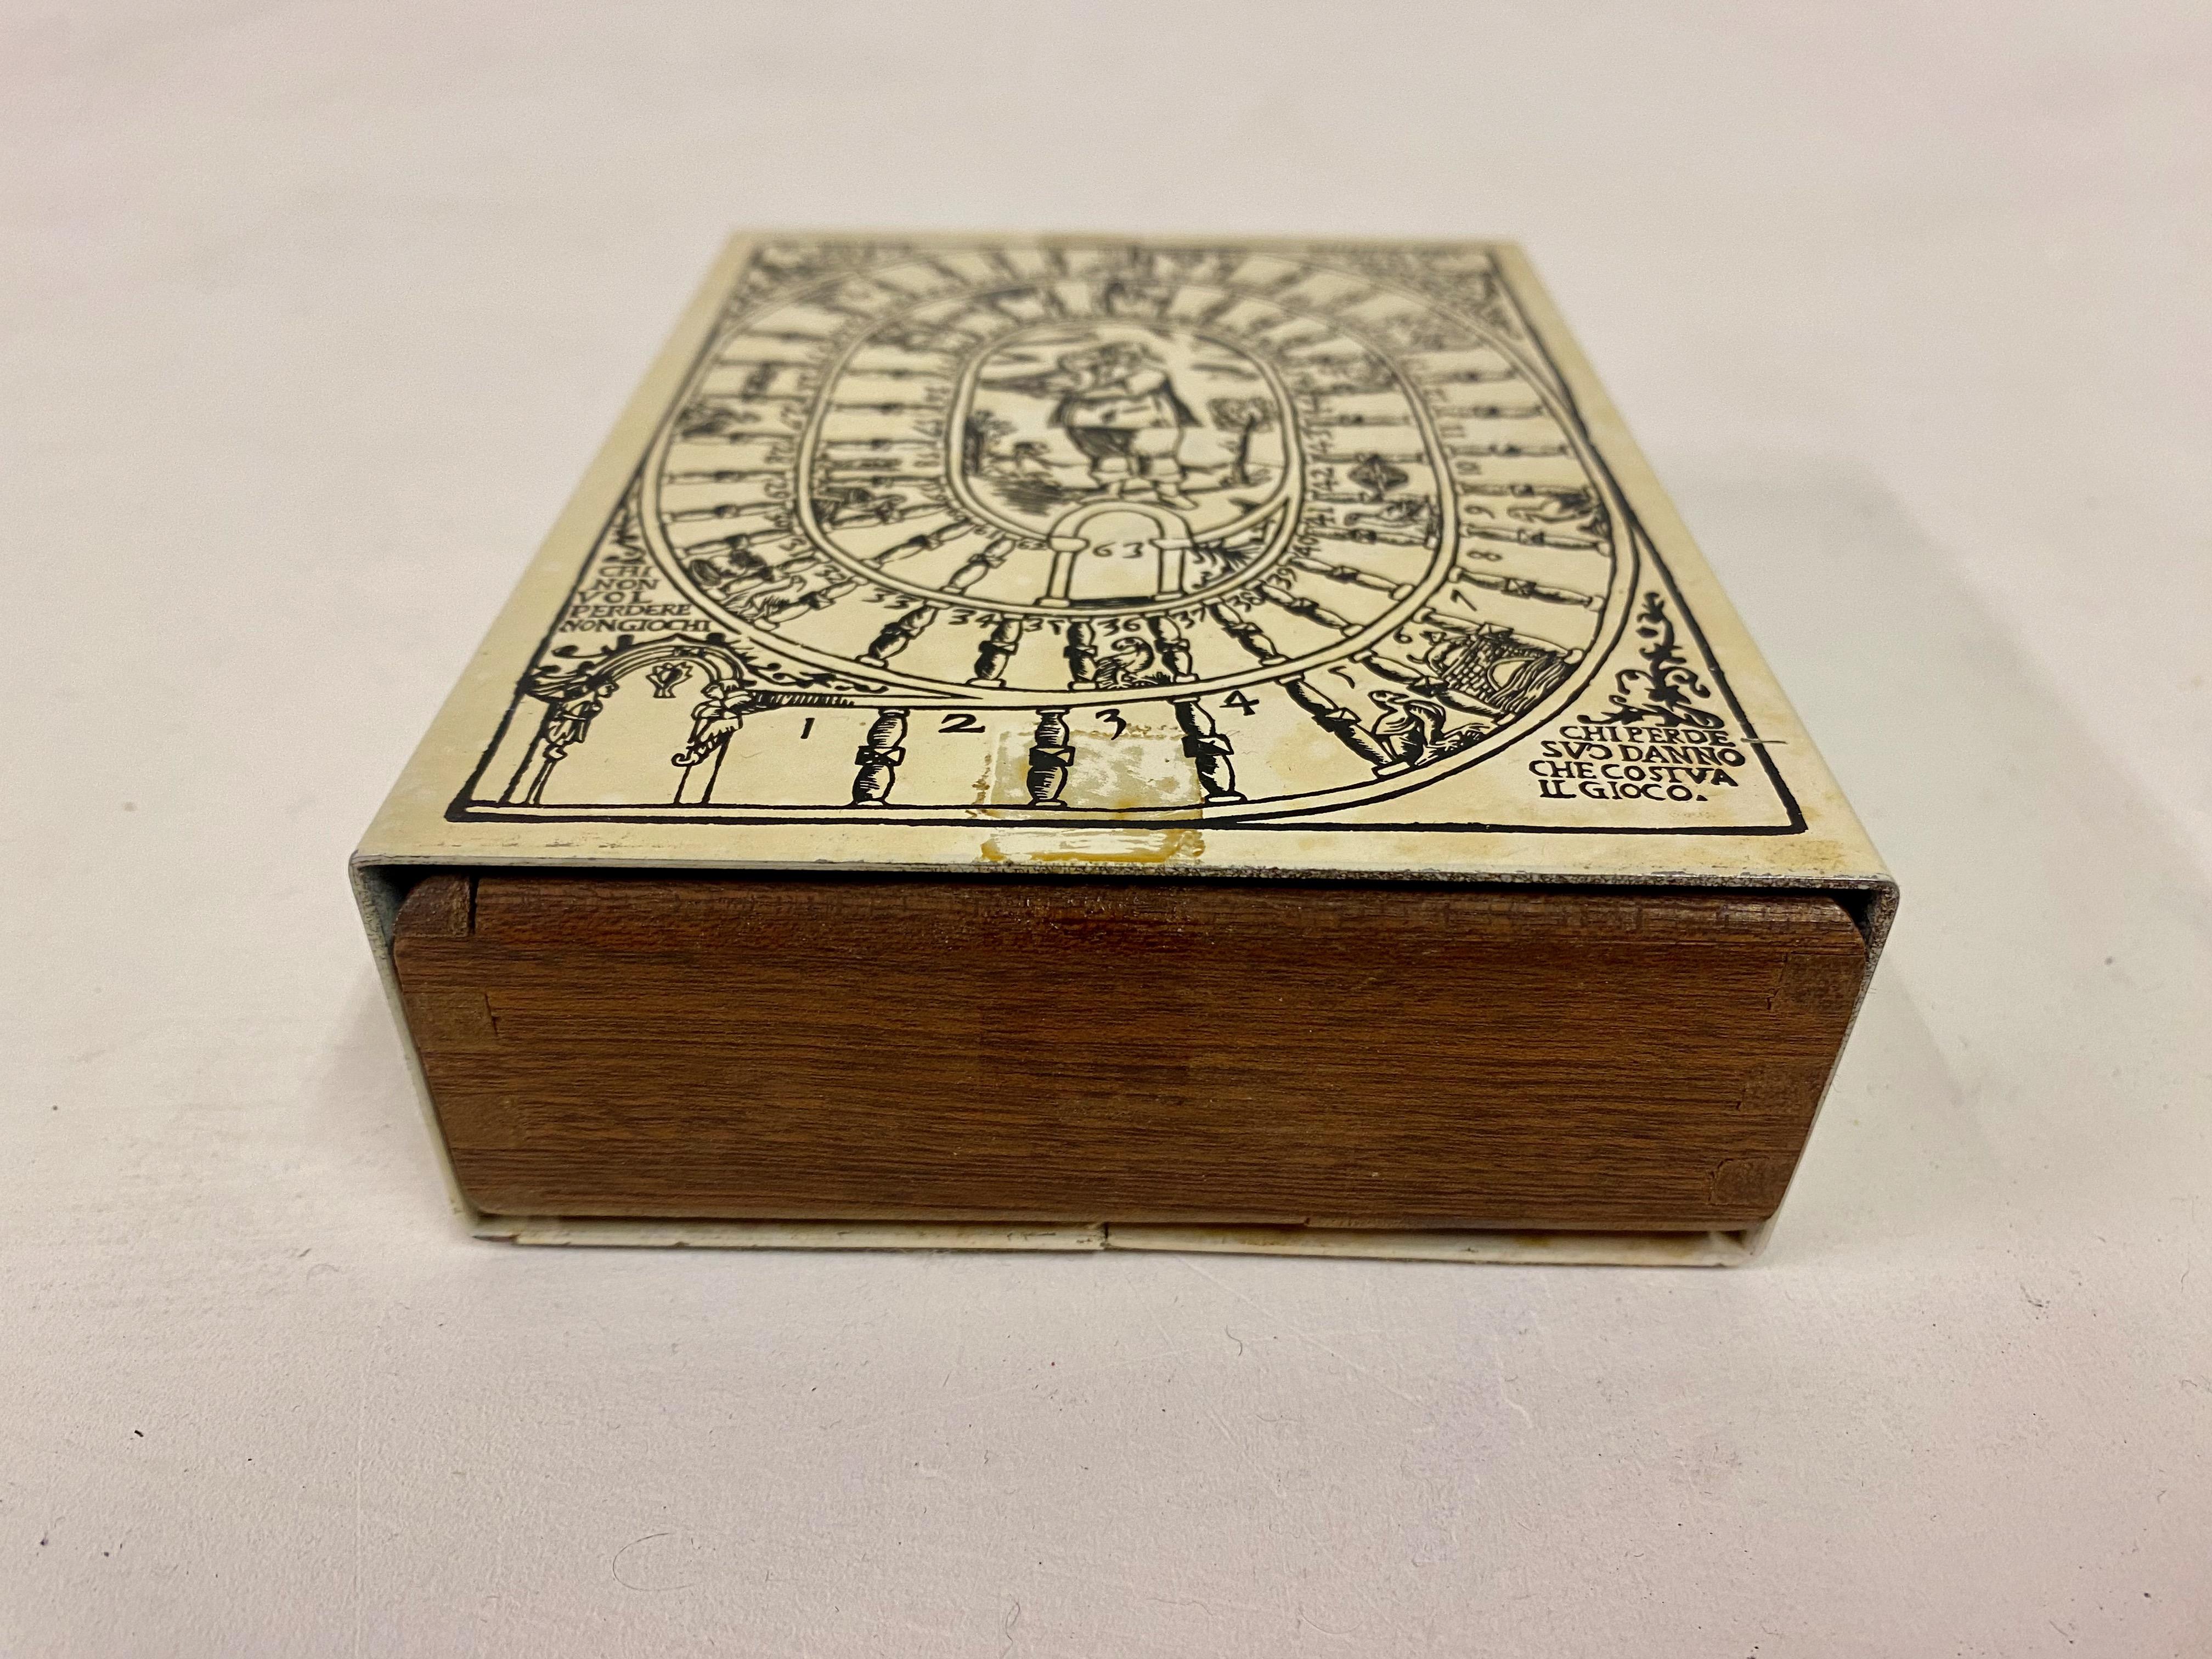 Litho Printed Storage Box in the Style of Fornasetti In Good Condition For Sale In London, London